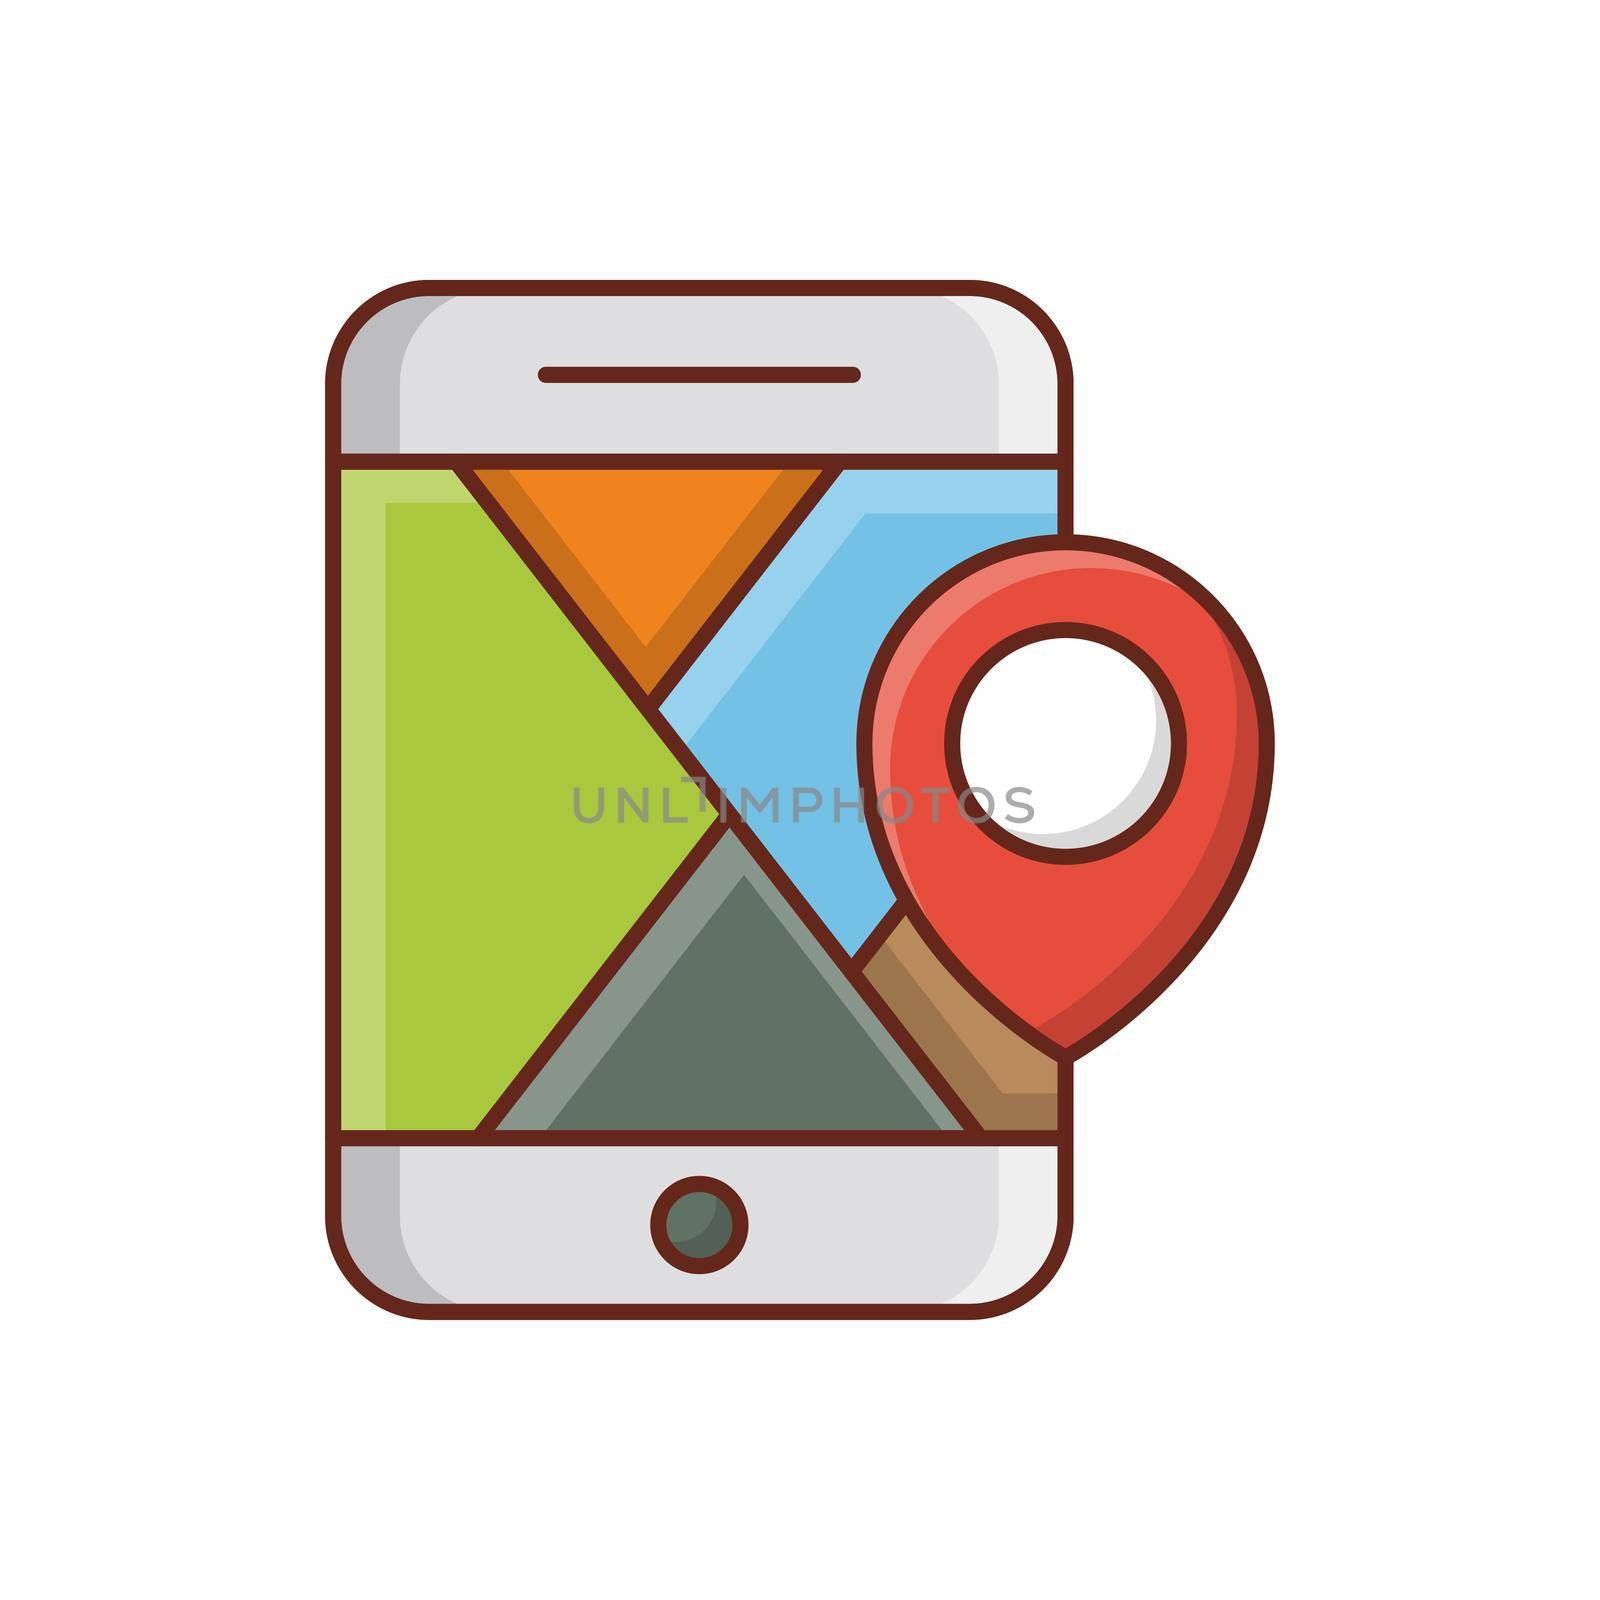 mobile by FlaticonsDesign